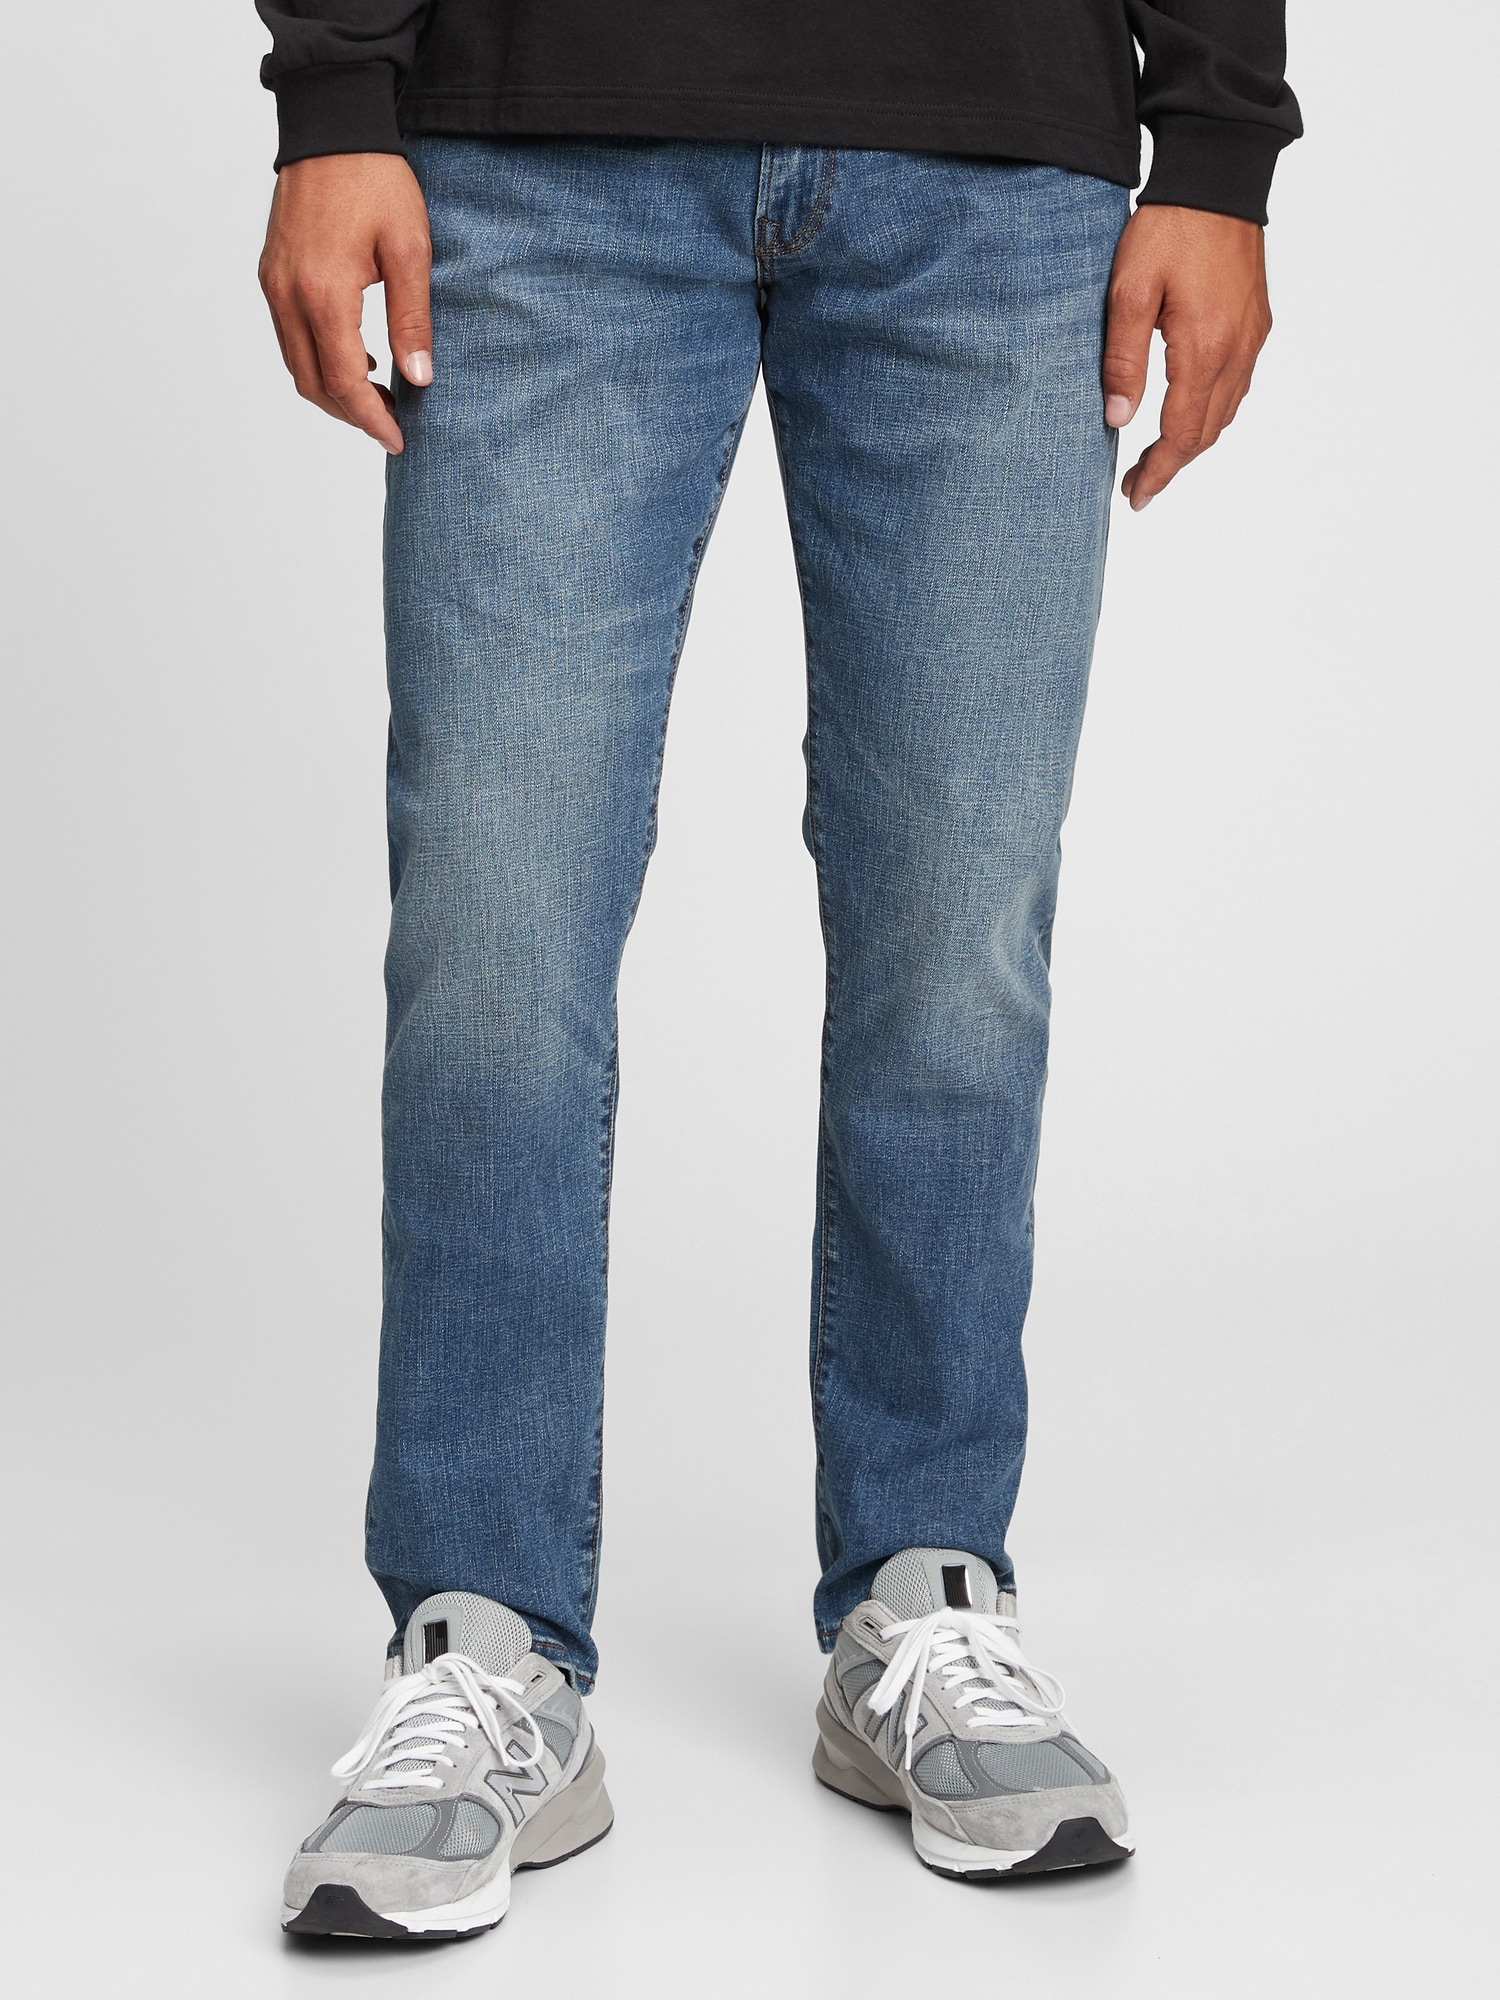 Wat Is Tapered Jeans | tunersread.com